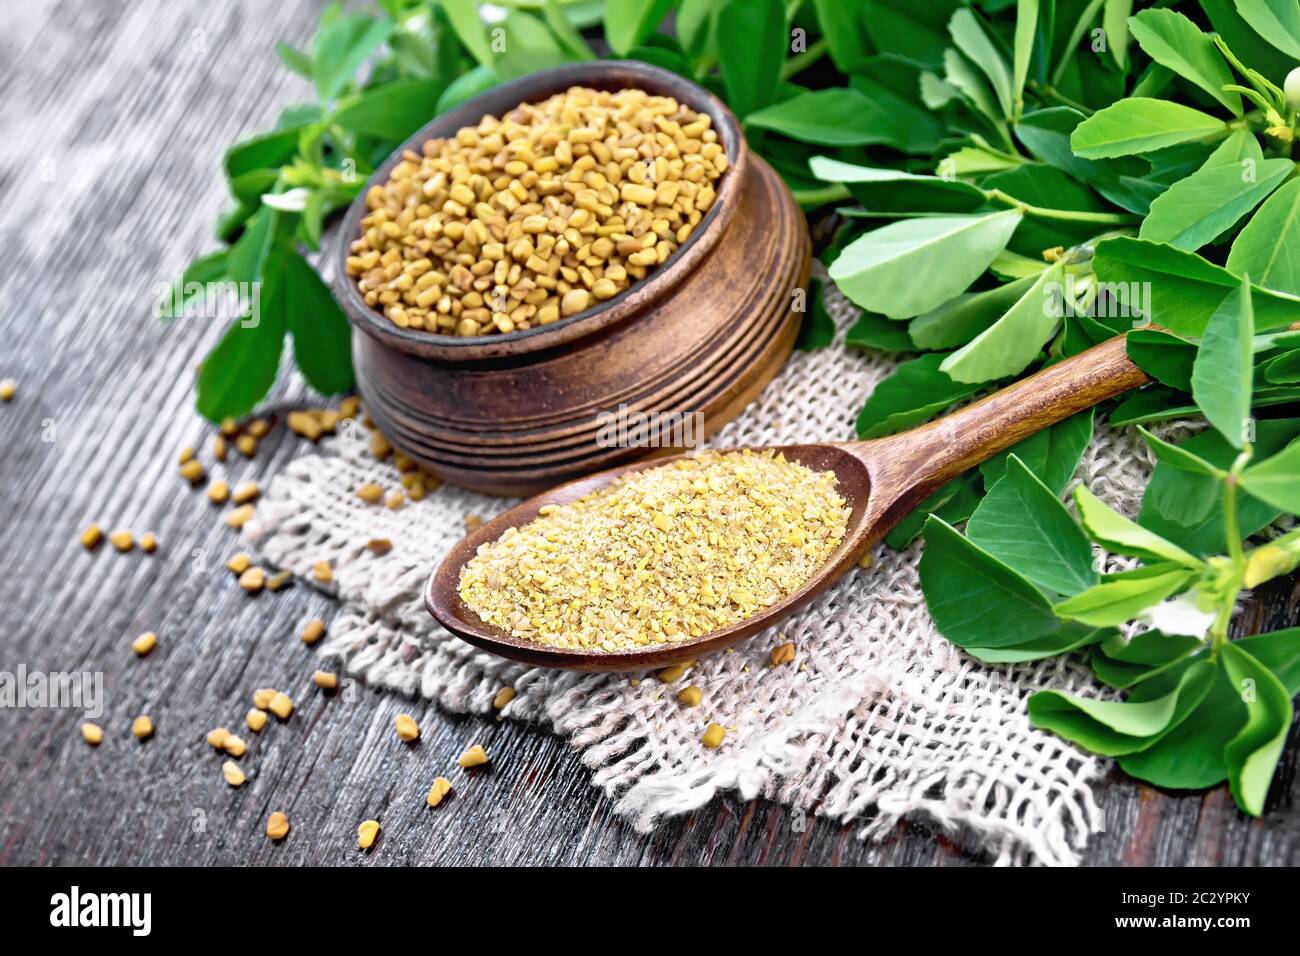 Ground fenugreek in a spoon and seeds in a bowl on a burlap napkin with green leaves on wooden board background Stock Photo